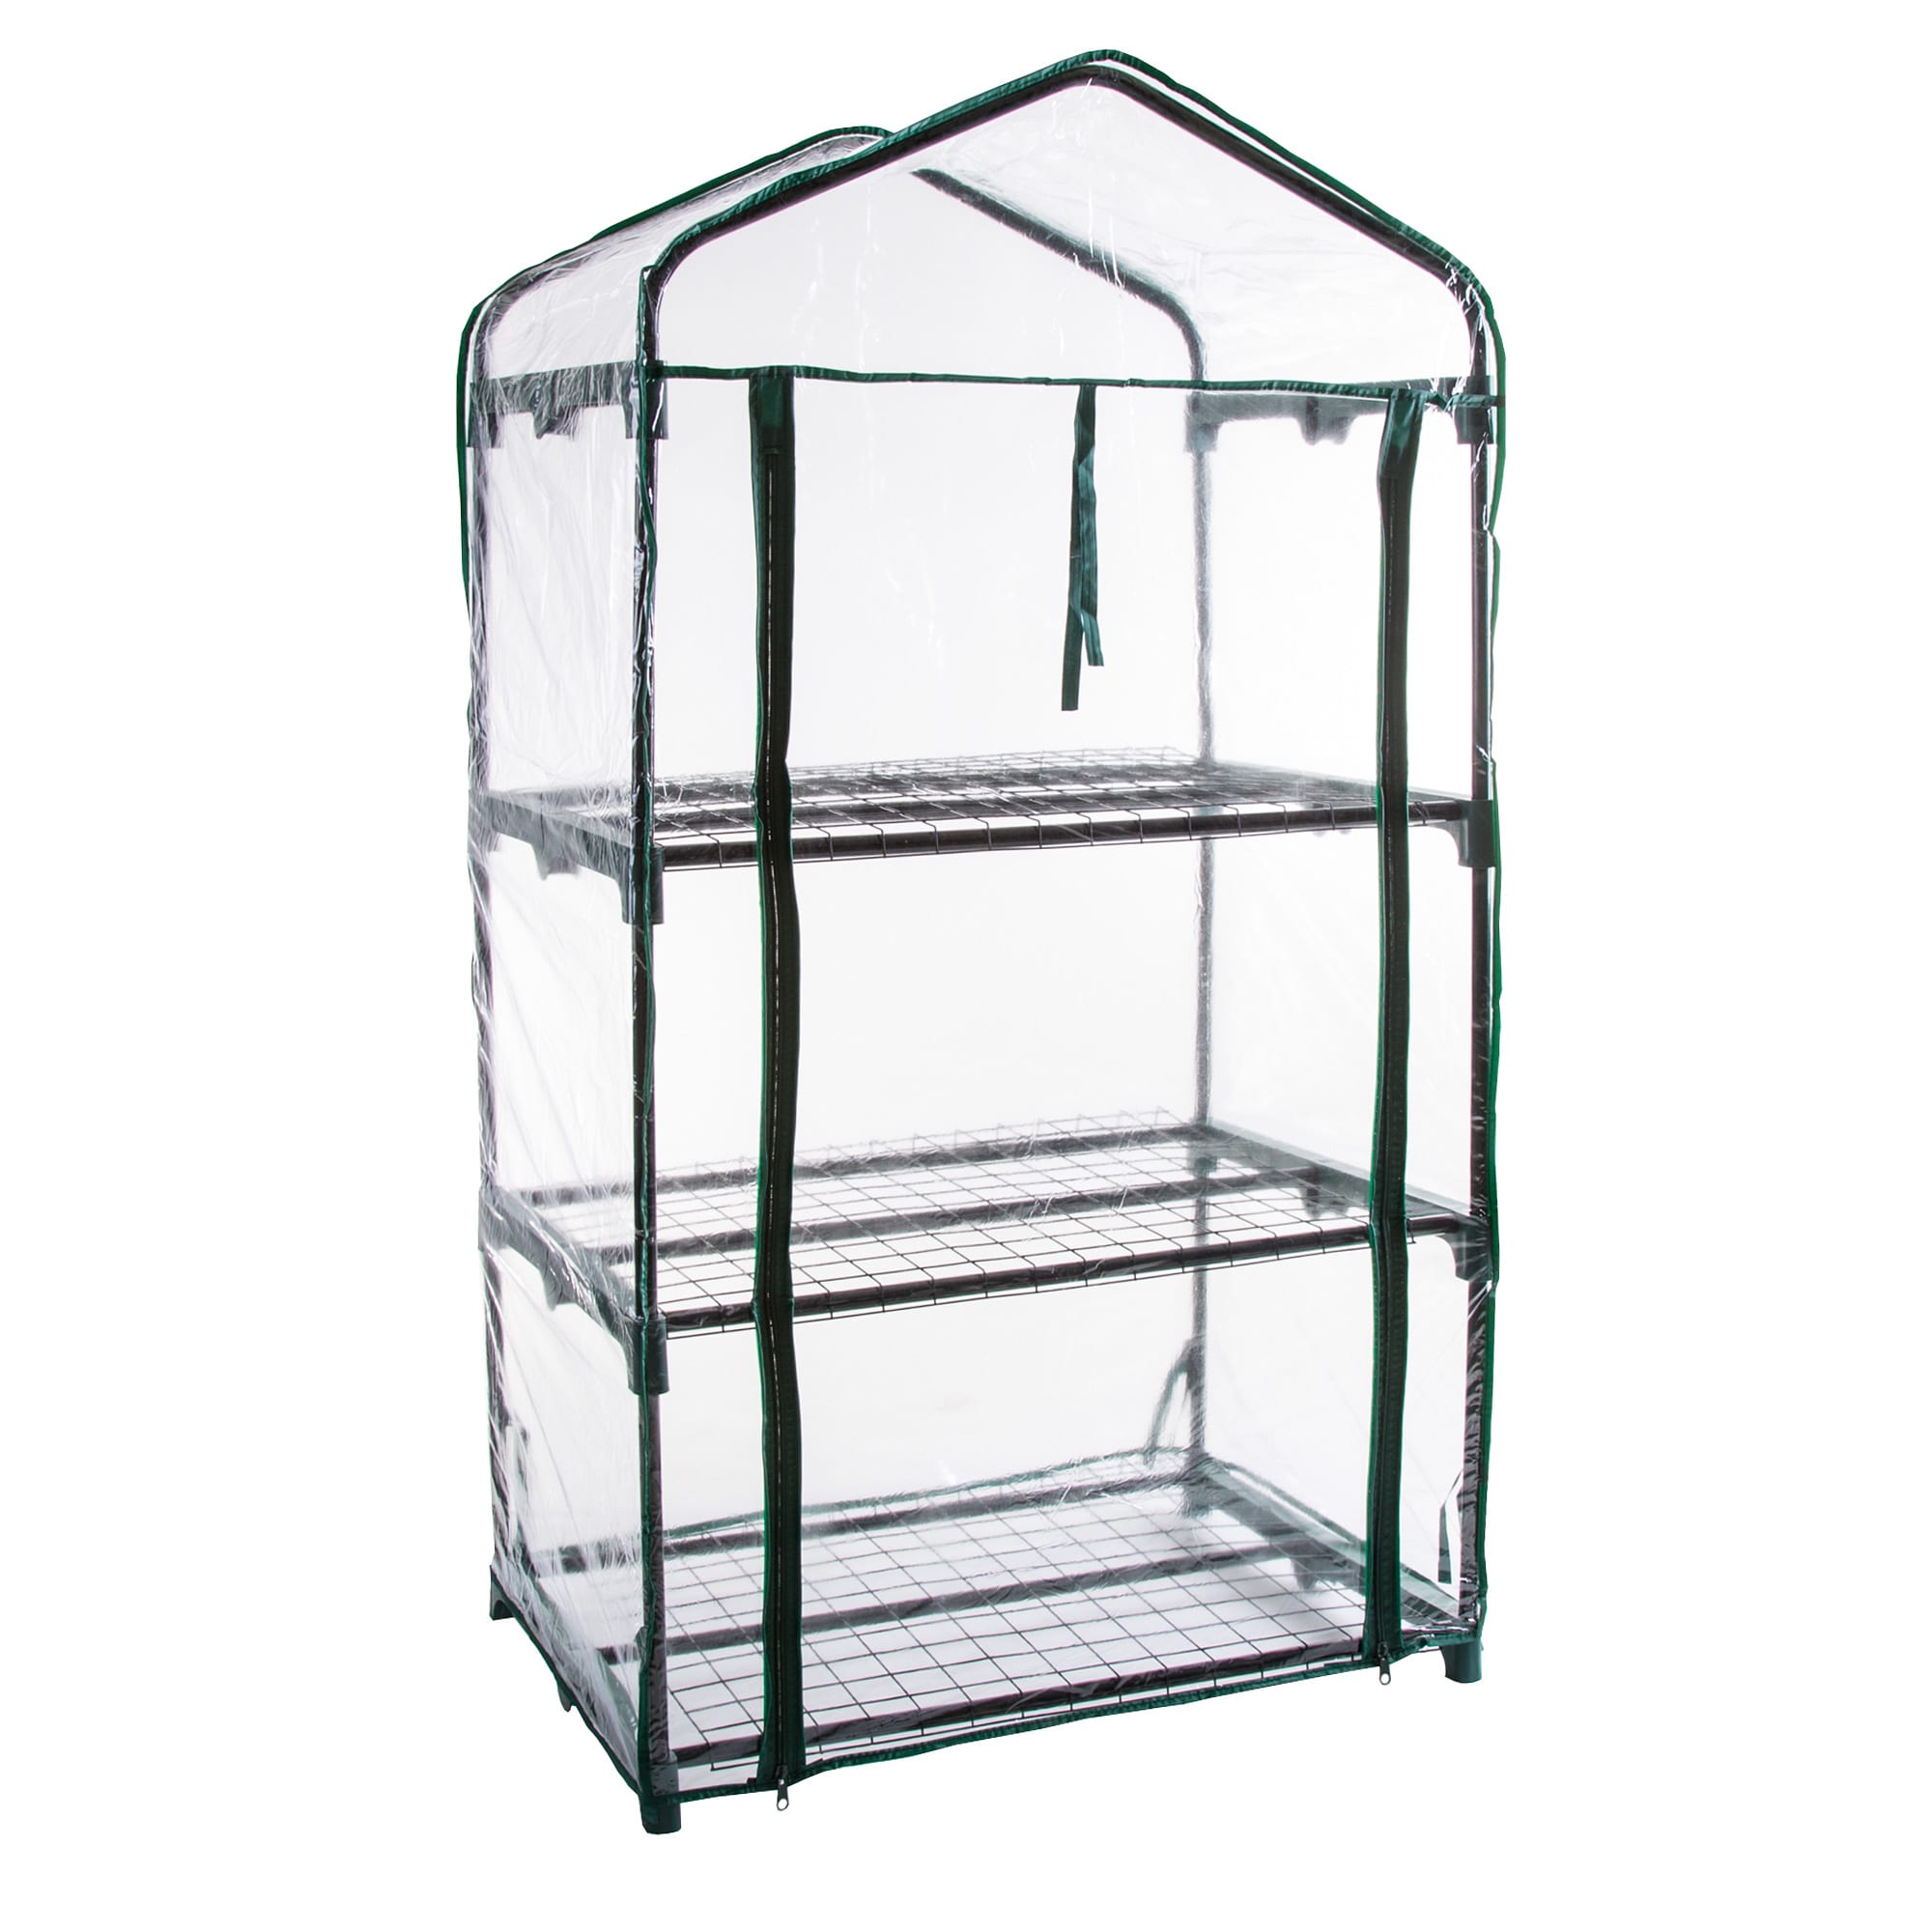 Mini 3-Tier Greenhouse 1.58-ft L x 2.29-ft W x 4.16-ft H Clear Pop-up Greenhouse | - Nature Spring 682817CNN